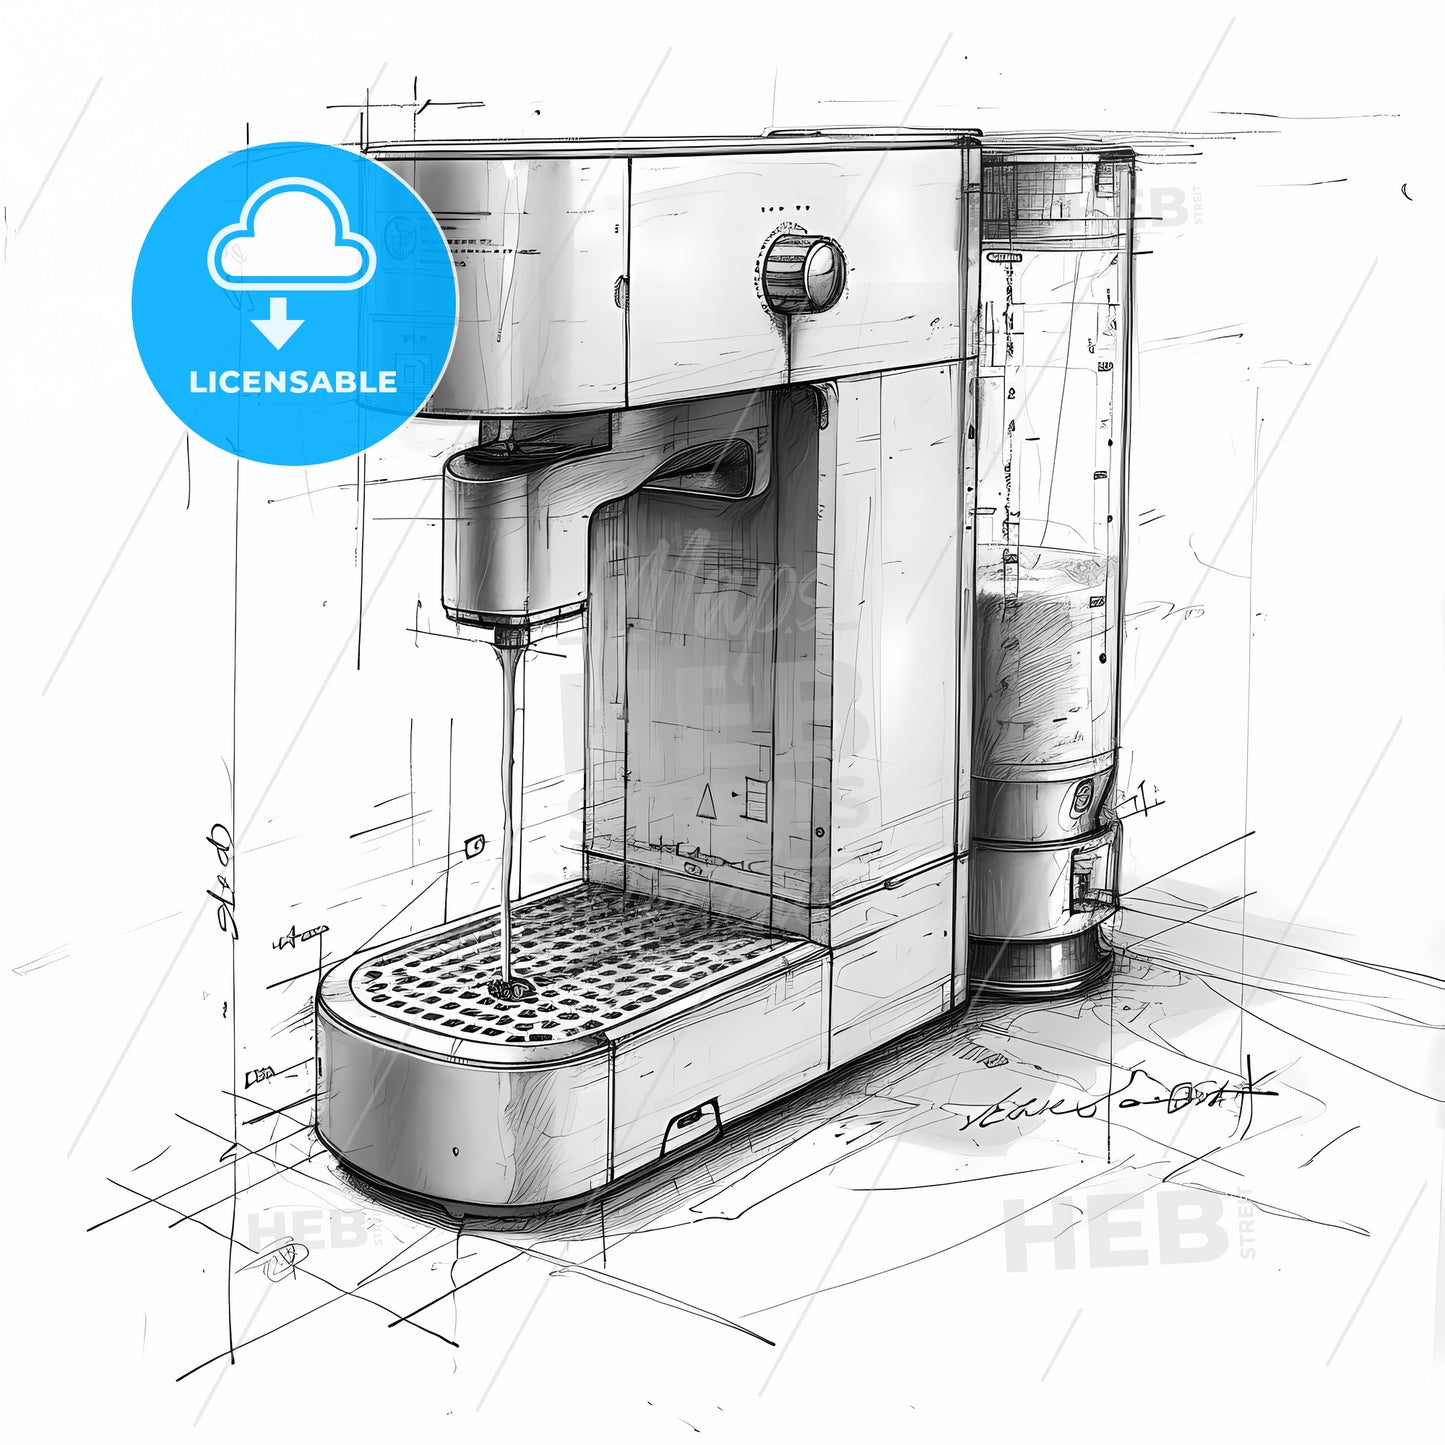 A Fast 2D Concept Draft Sketch Of Coffee Maker, A Sketch Of A Coffee Machine